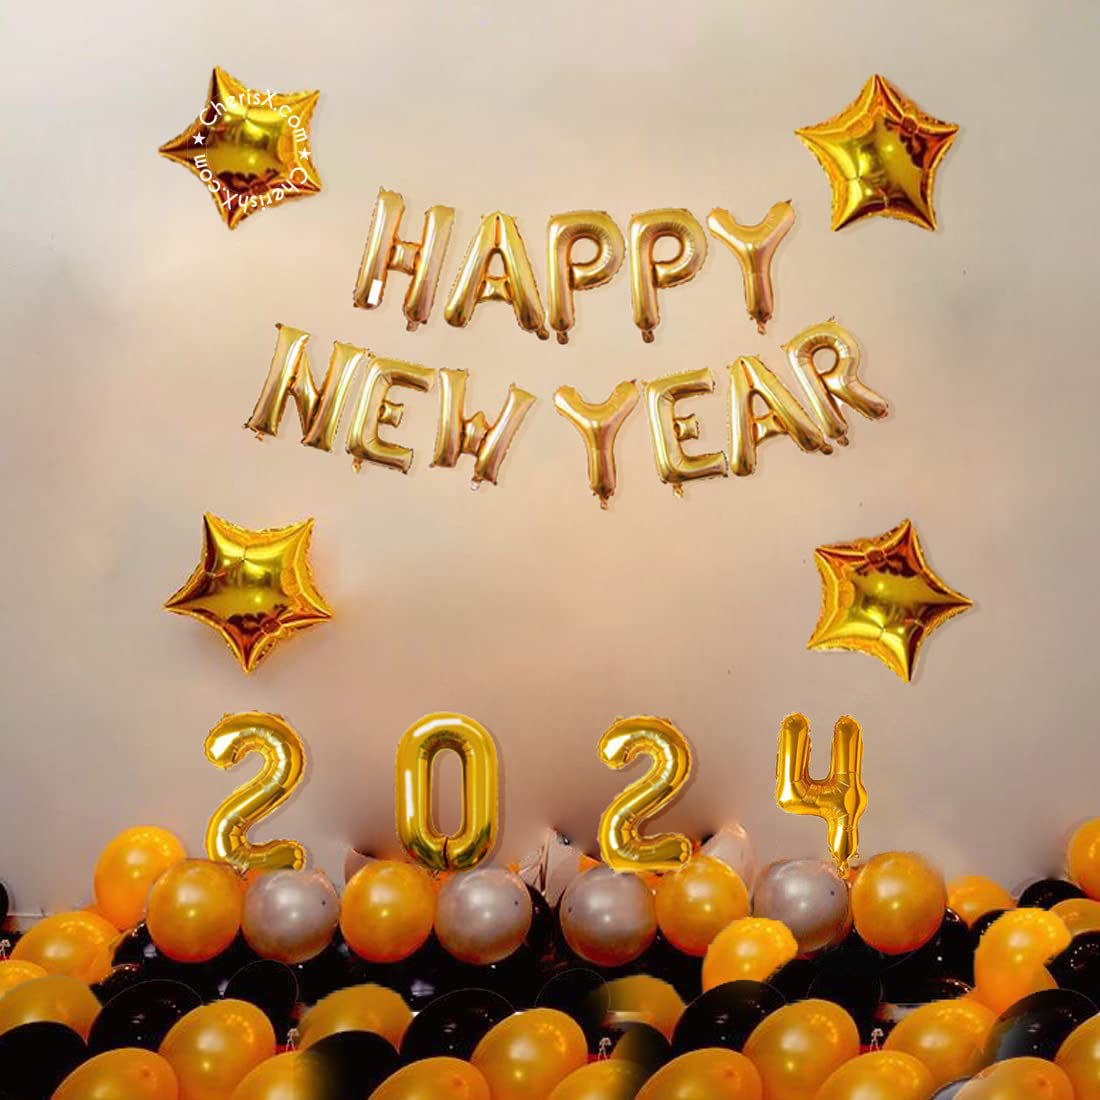 2024 New Year Balloons 16 Inch Gold Silver Rose Gold 2024